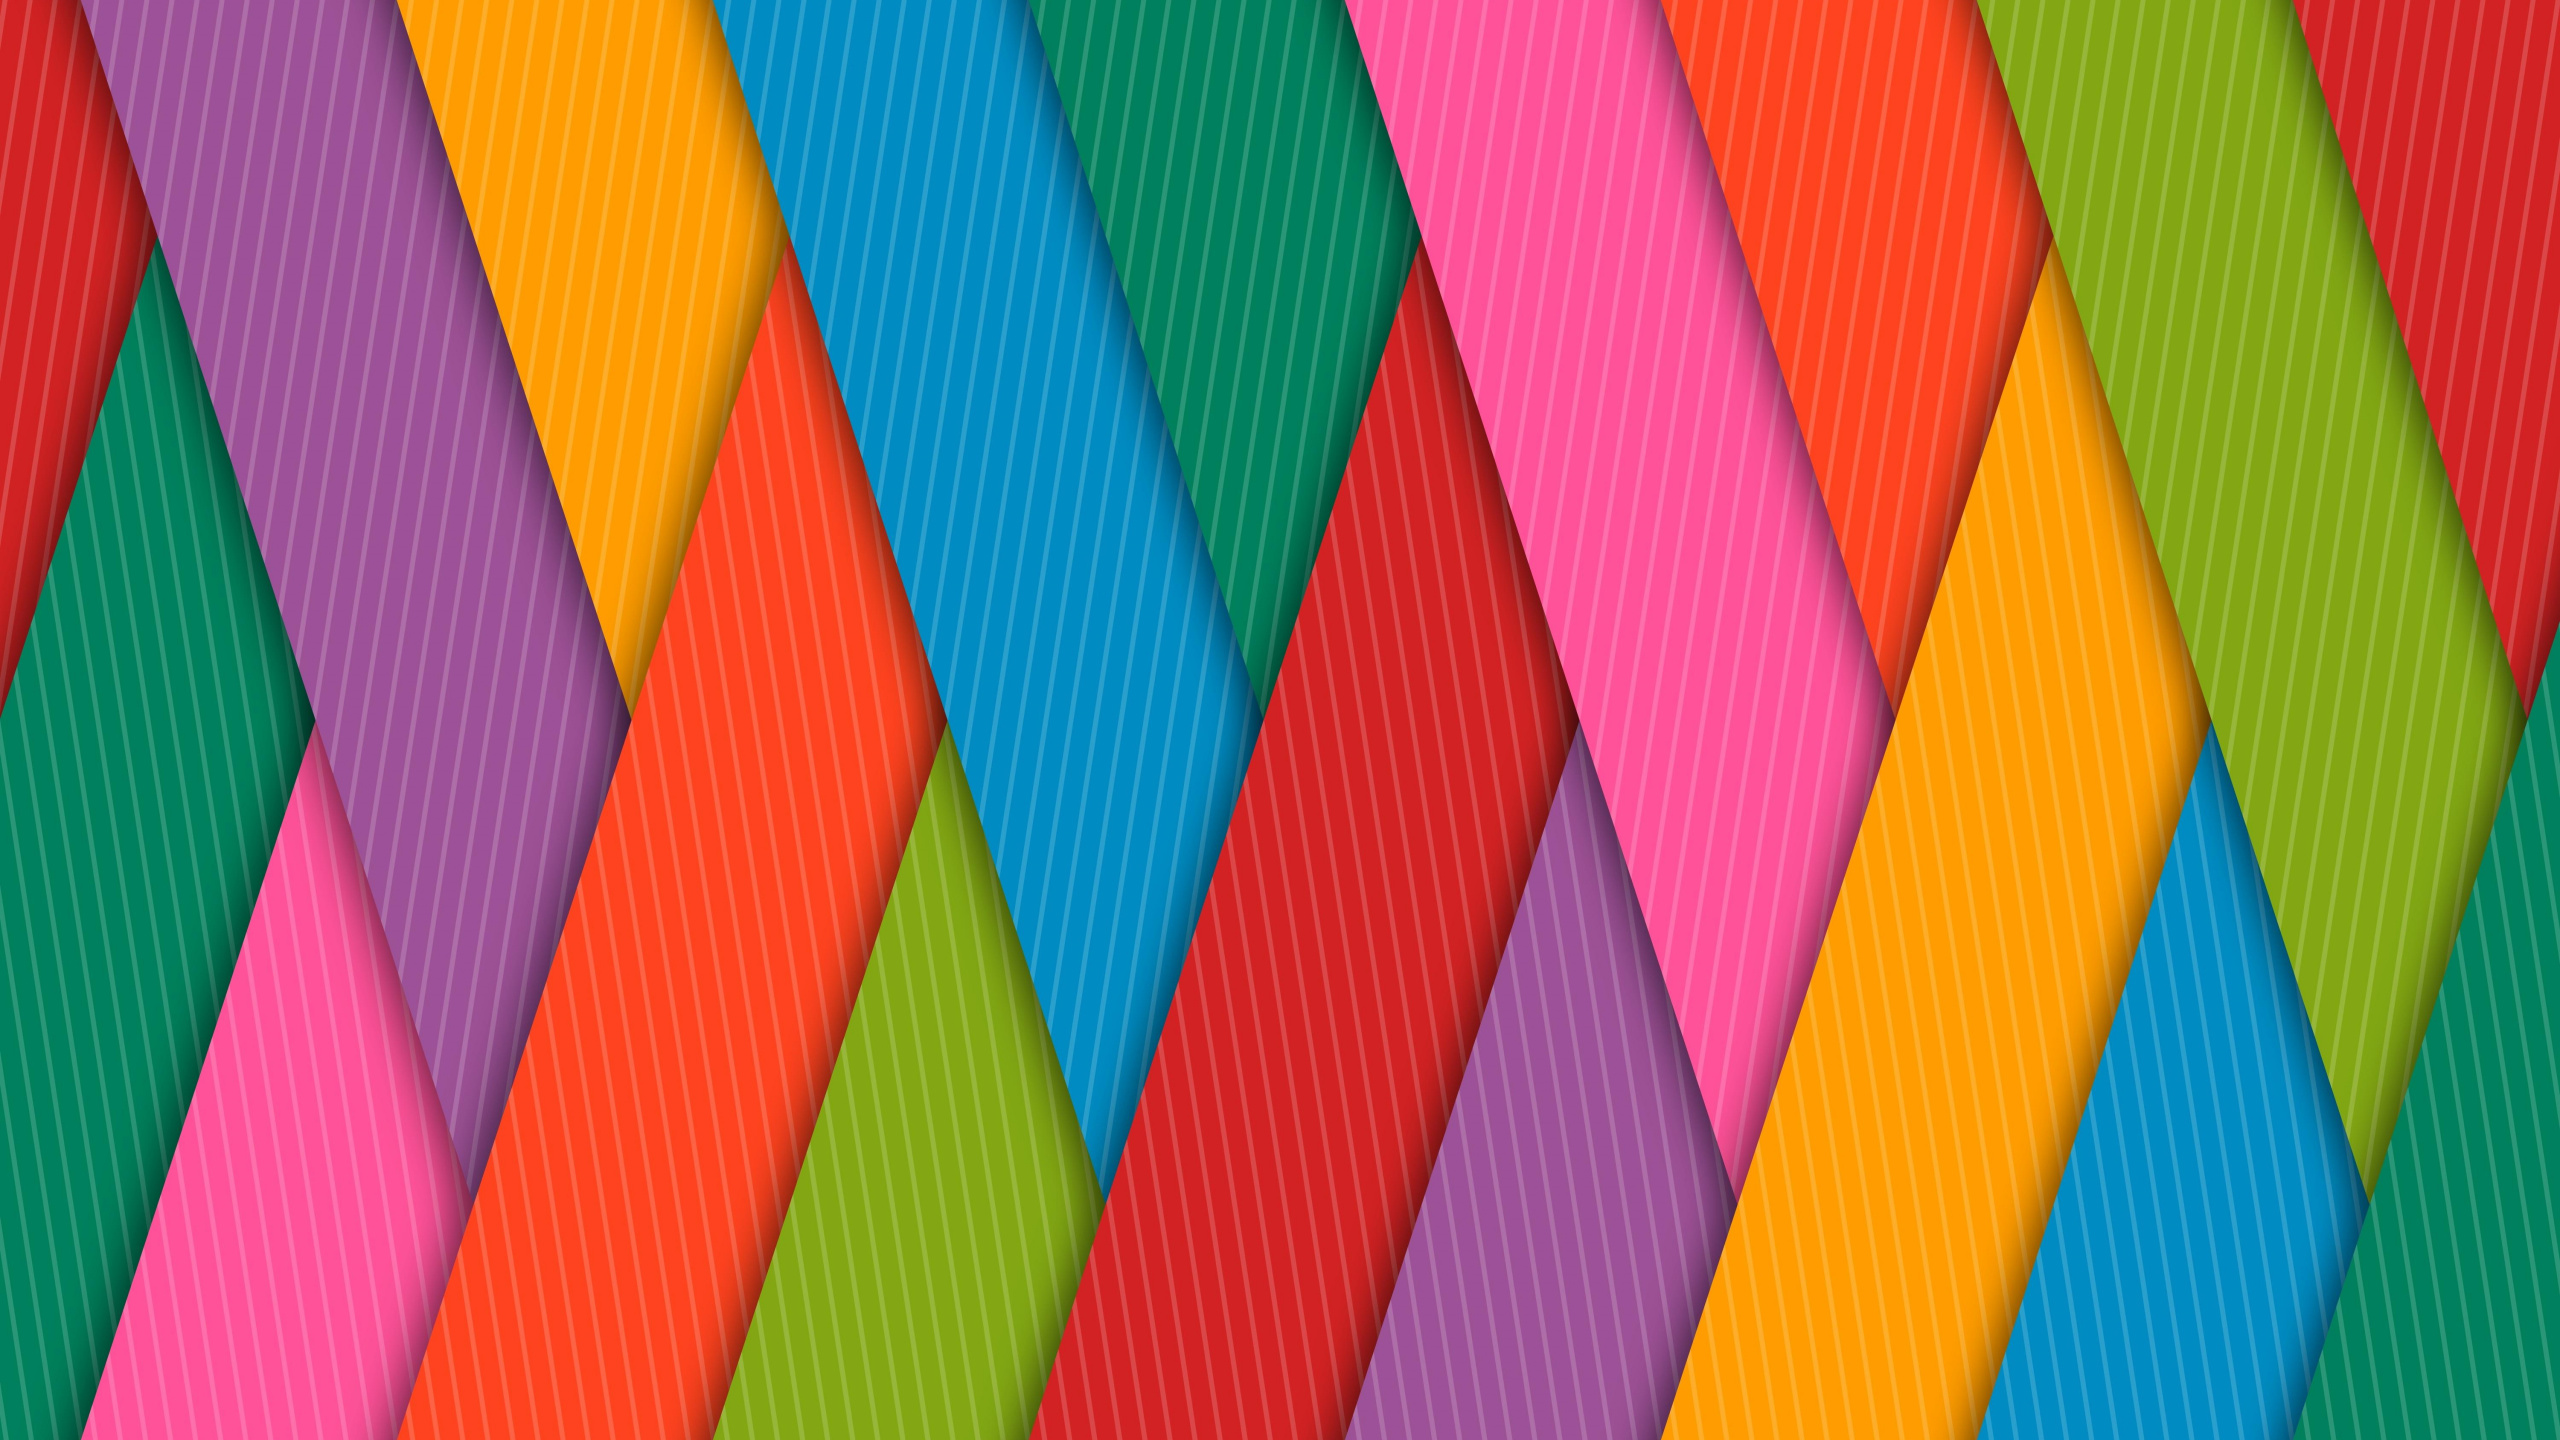 Red Blue and Green Striped Textile. Wallpaper in 2560x1440 Resolution